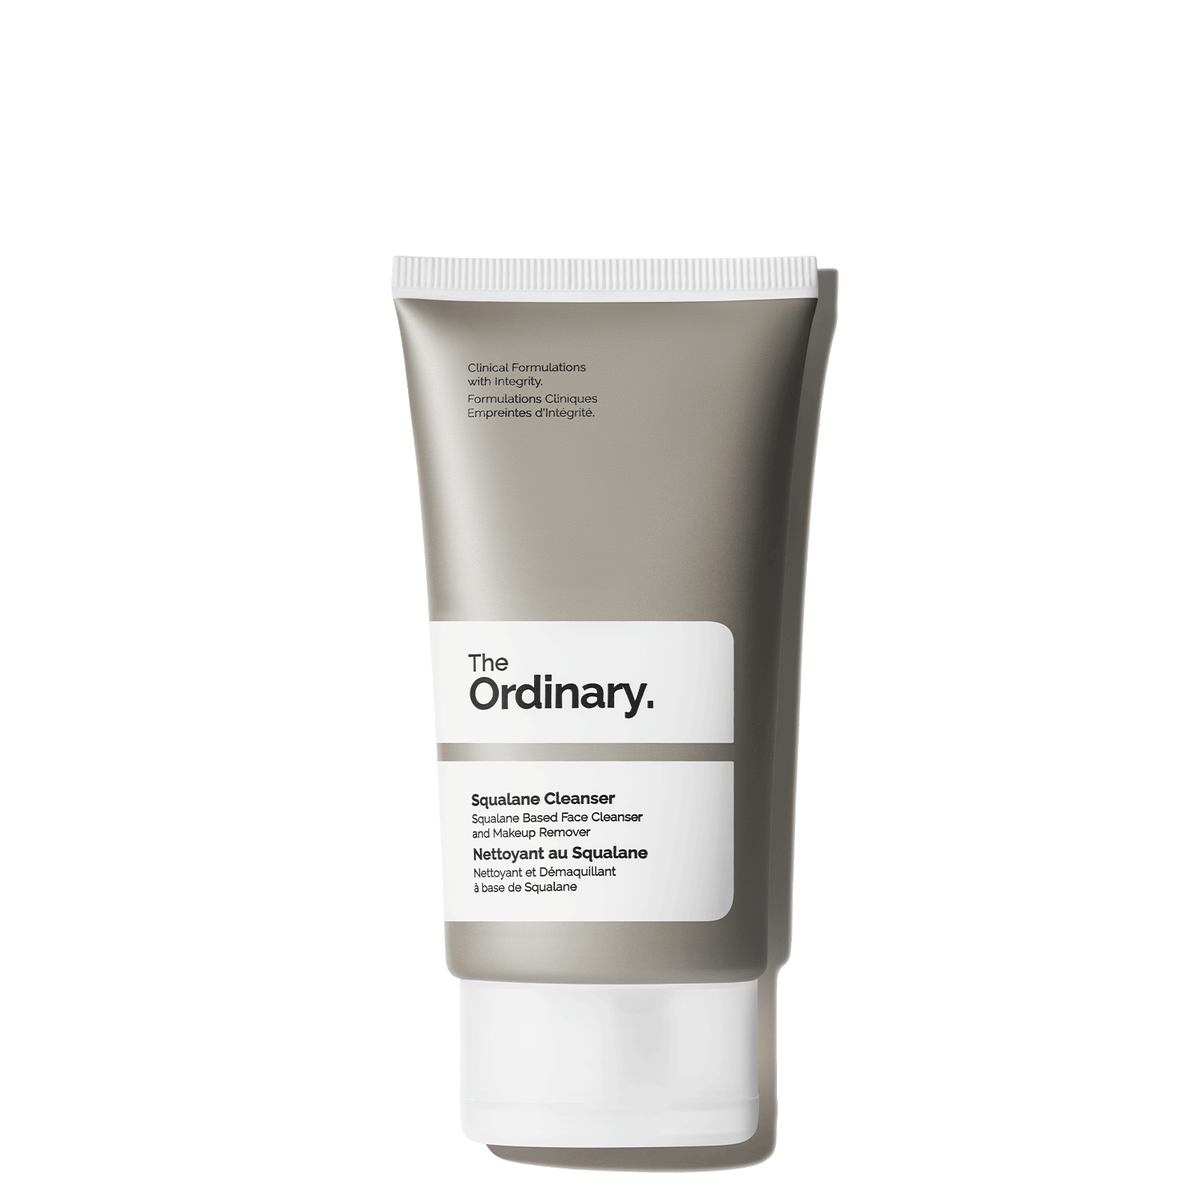 THE ORDINARY Squalane Cleanser - Parafam